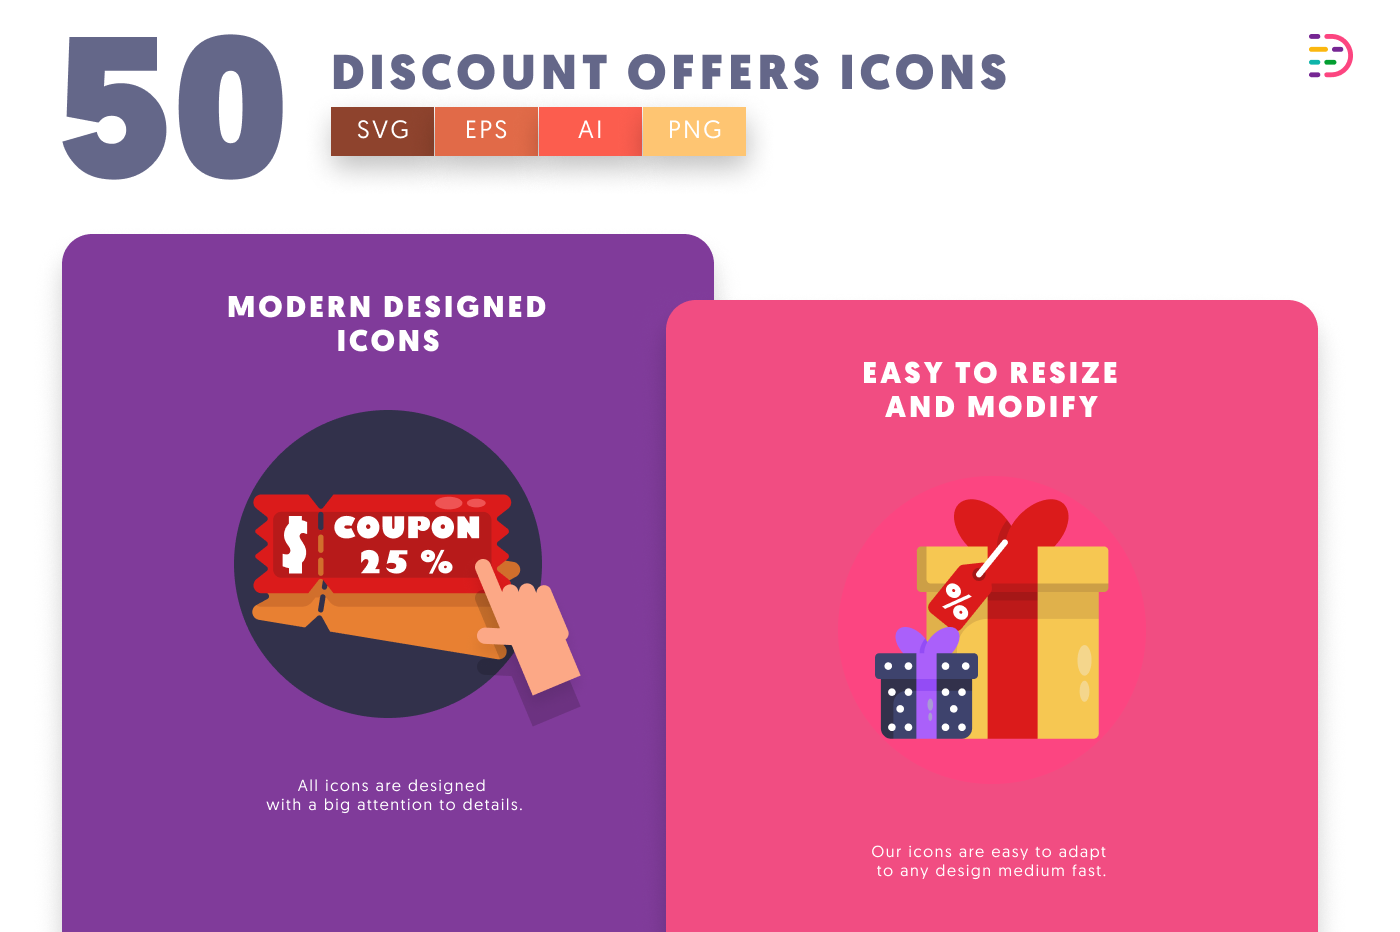 Promote your special offers with our high-quality Discount and Sales Offers Icons pack